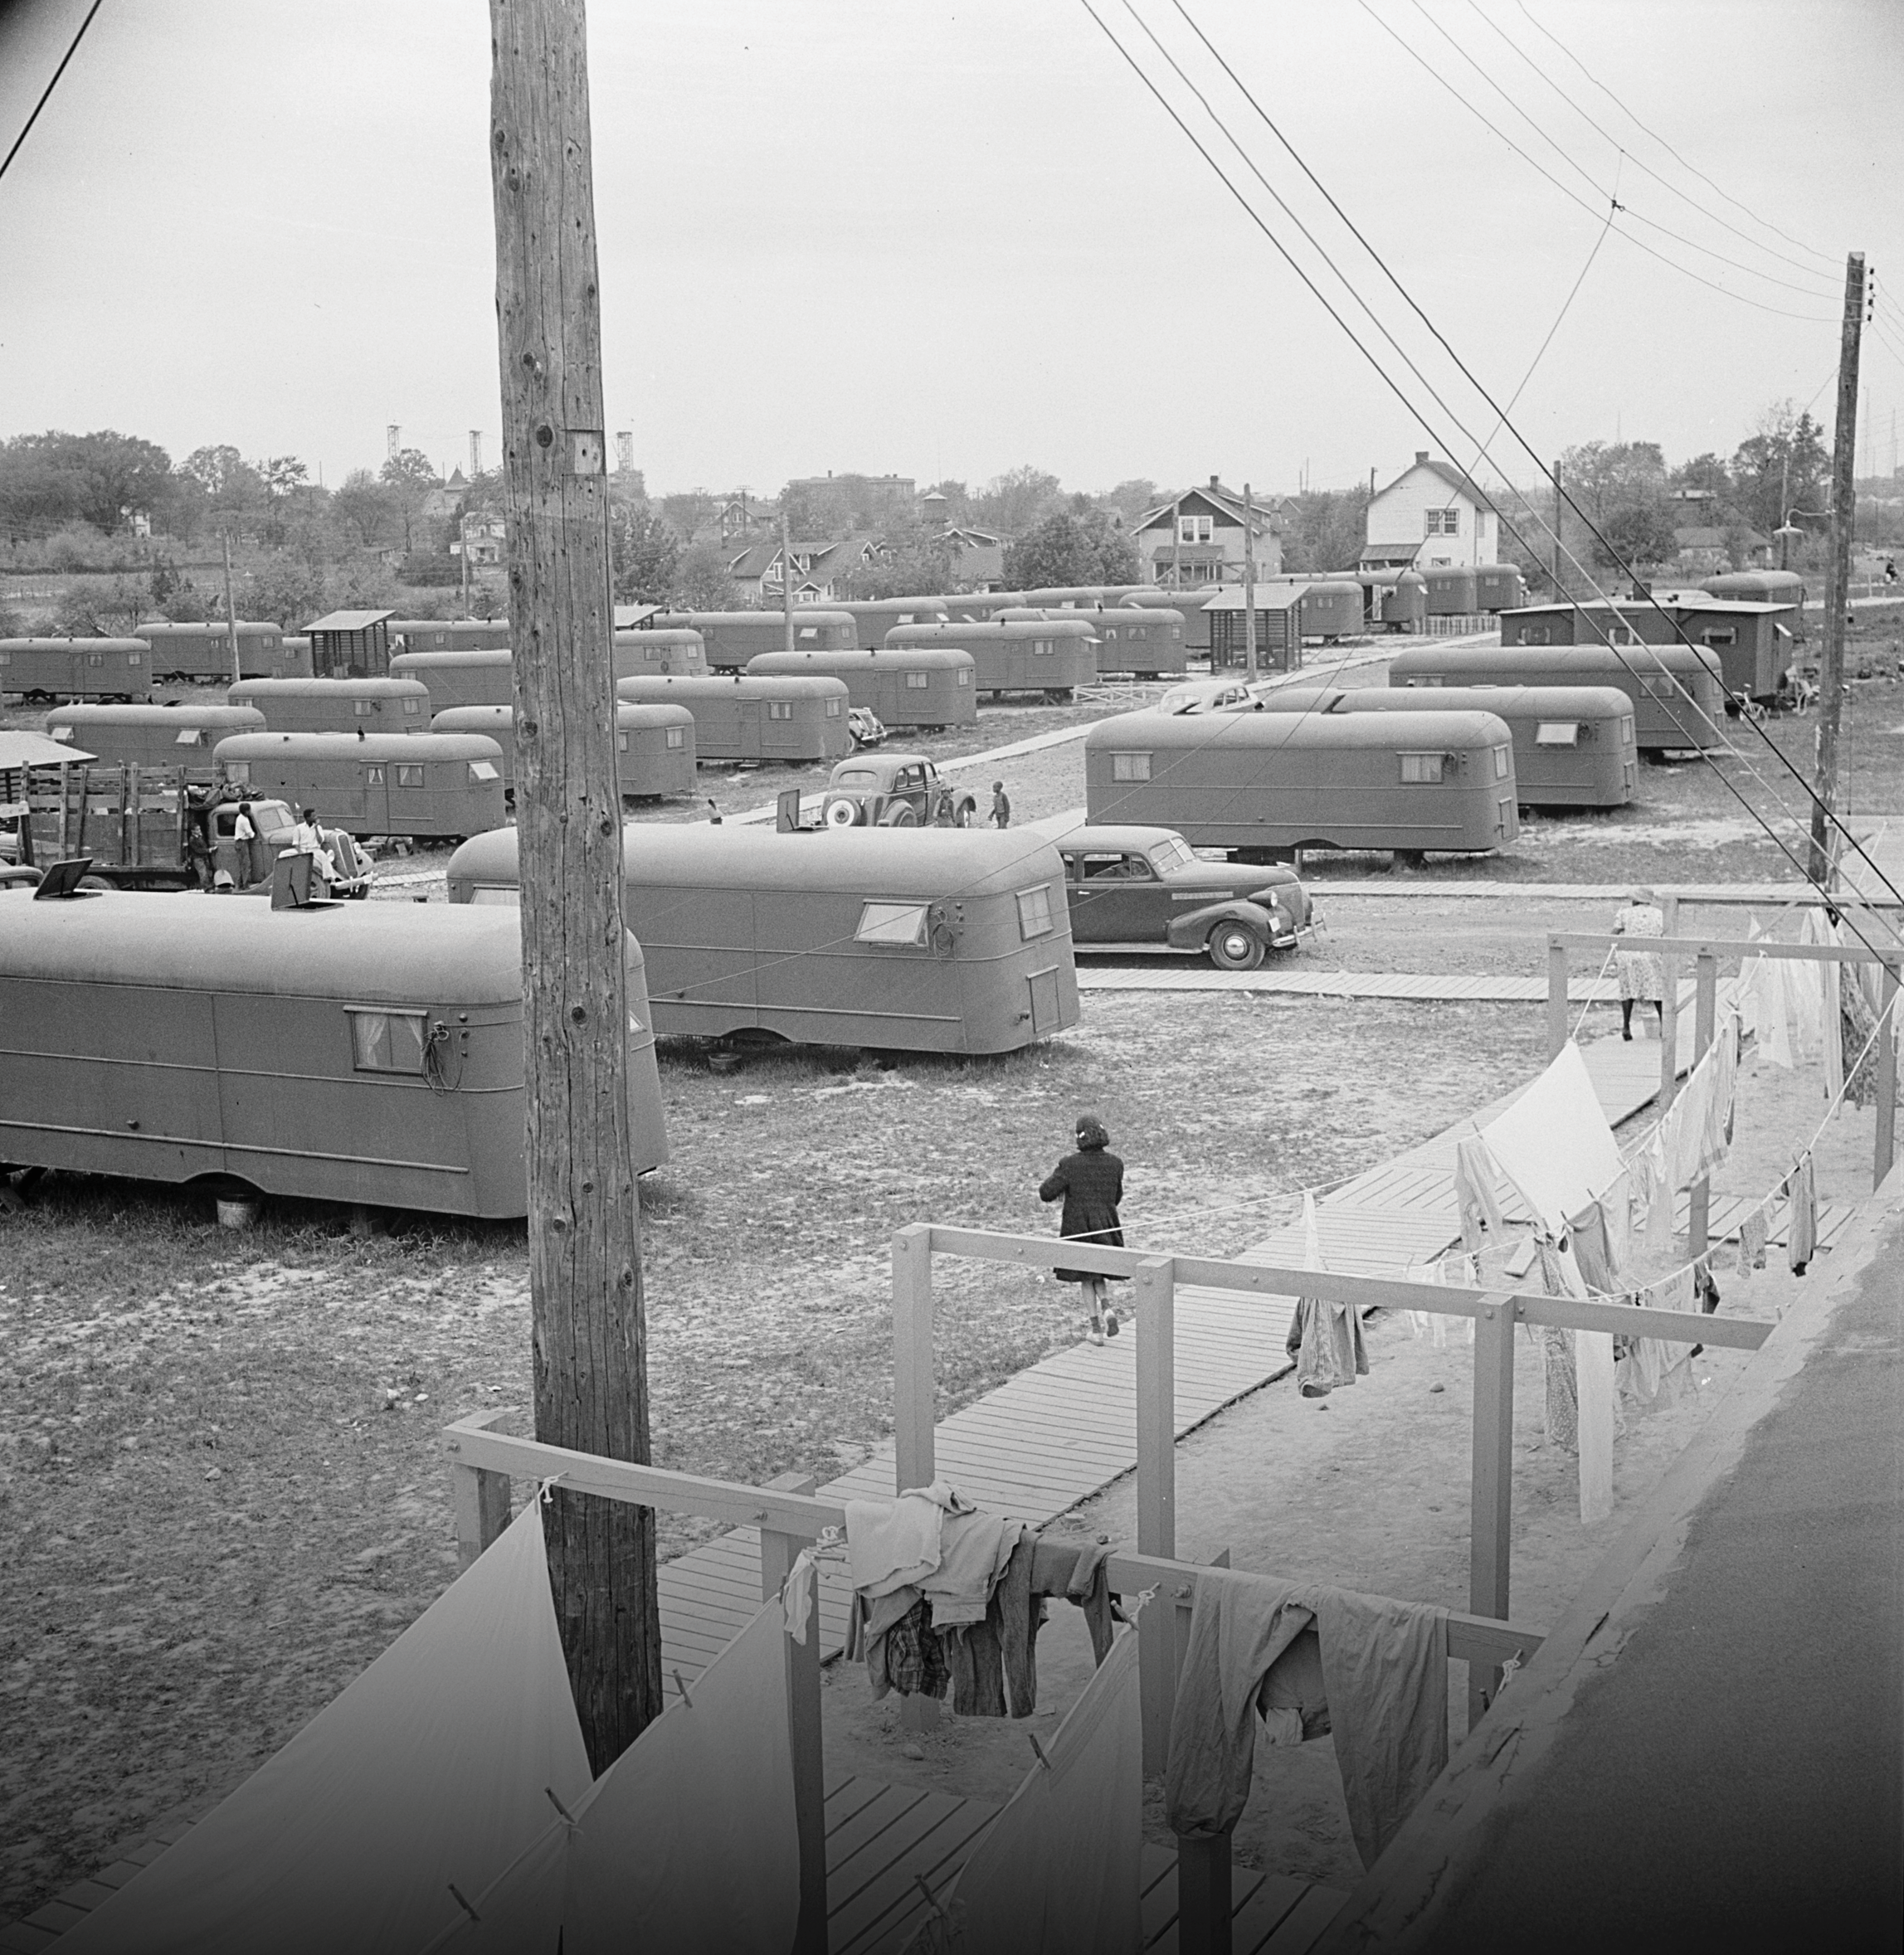 Trailer camp for displaced Black residents, Arlington, 1942. Library of Congress.